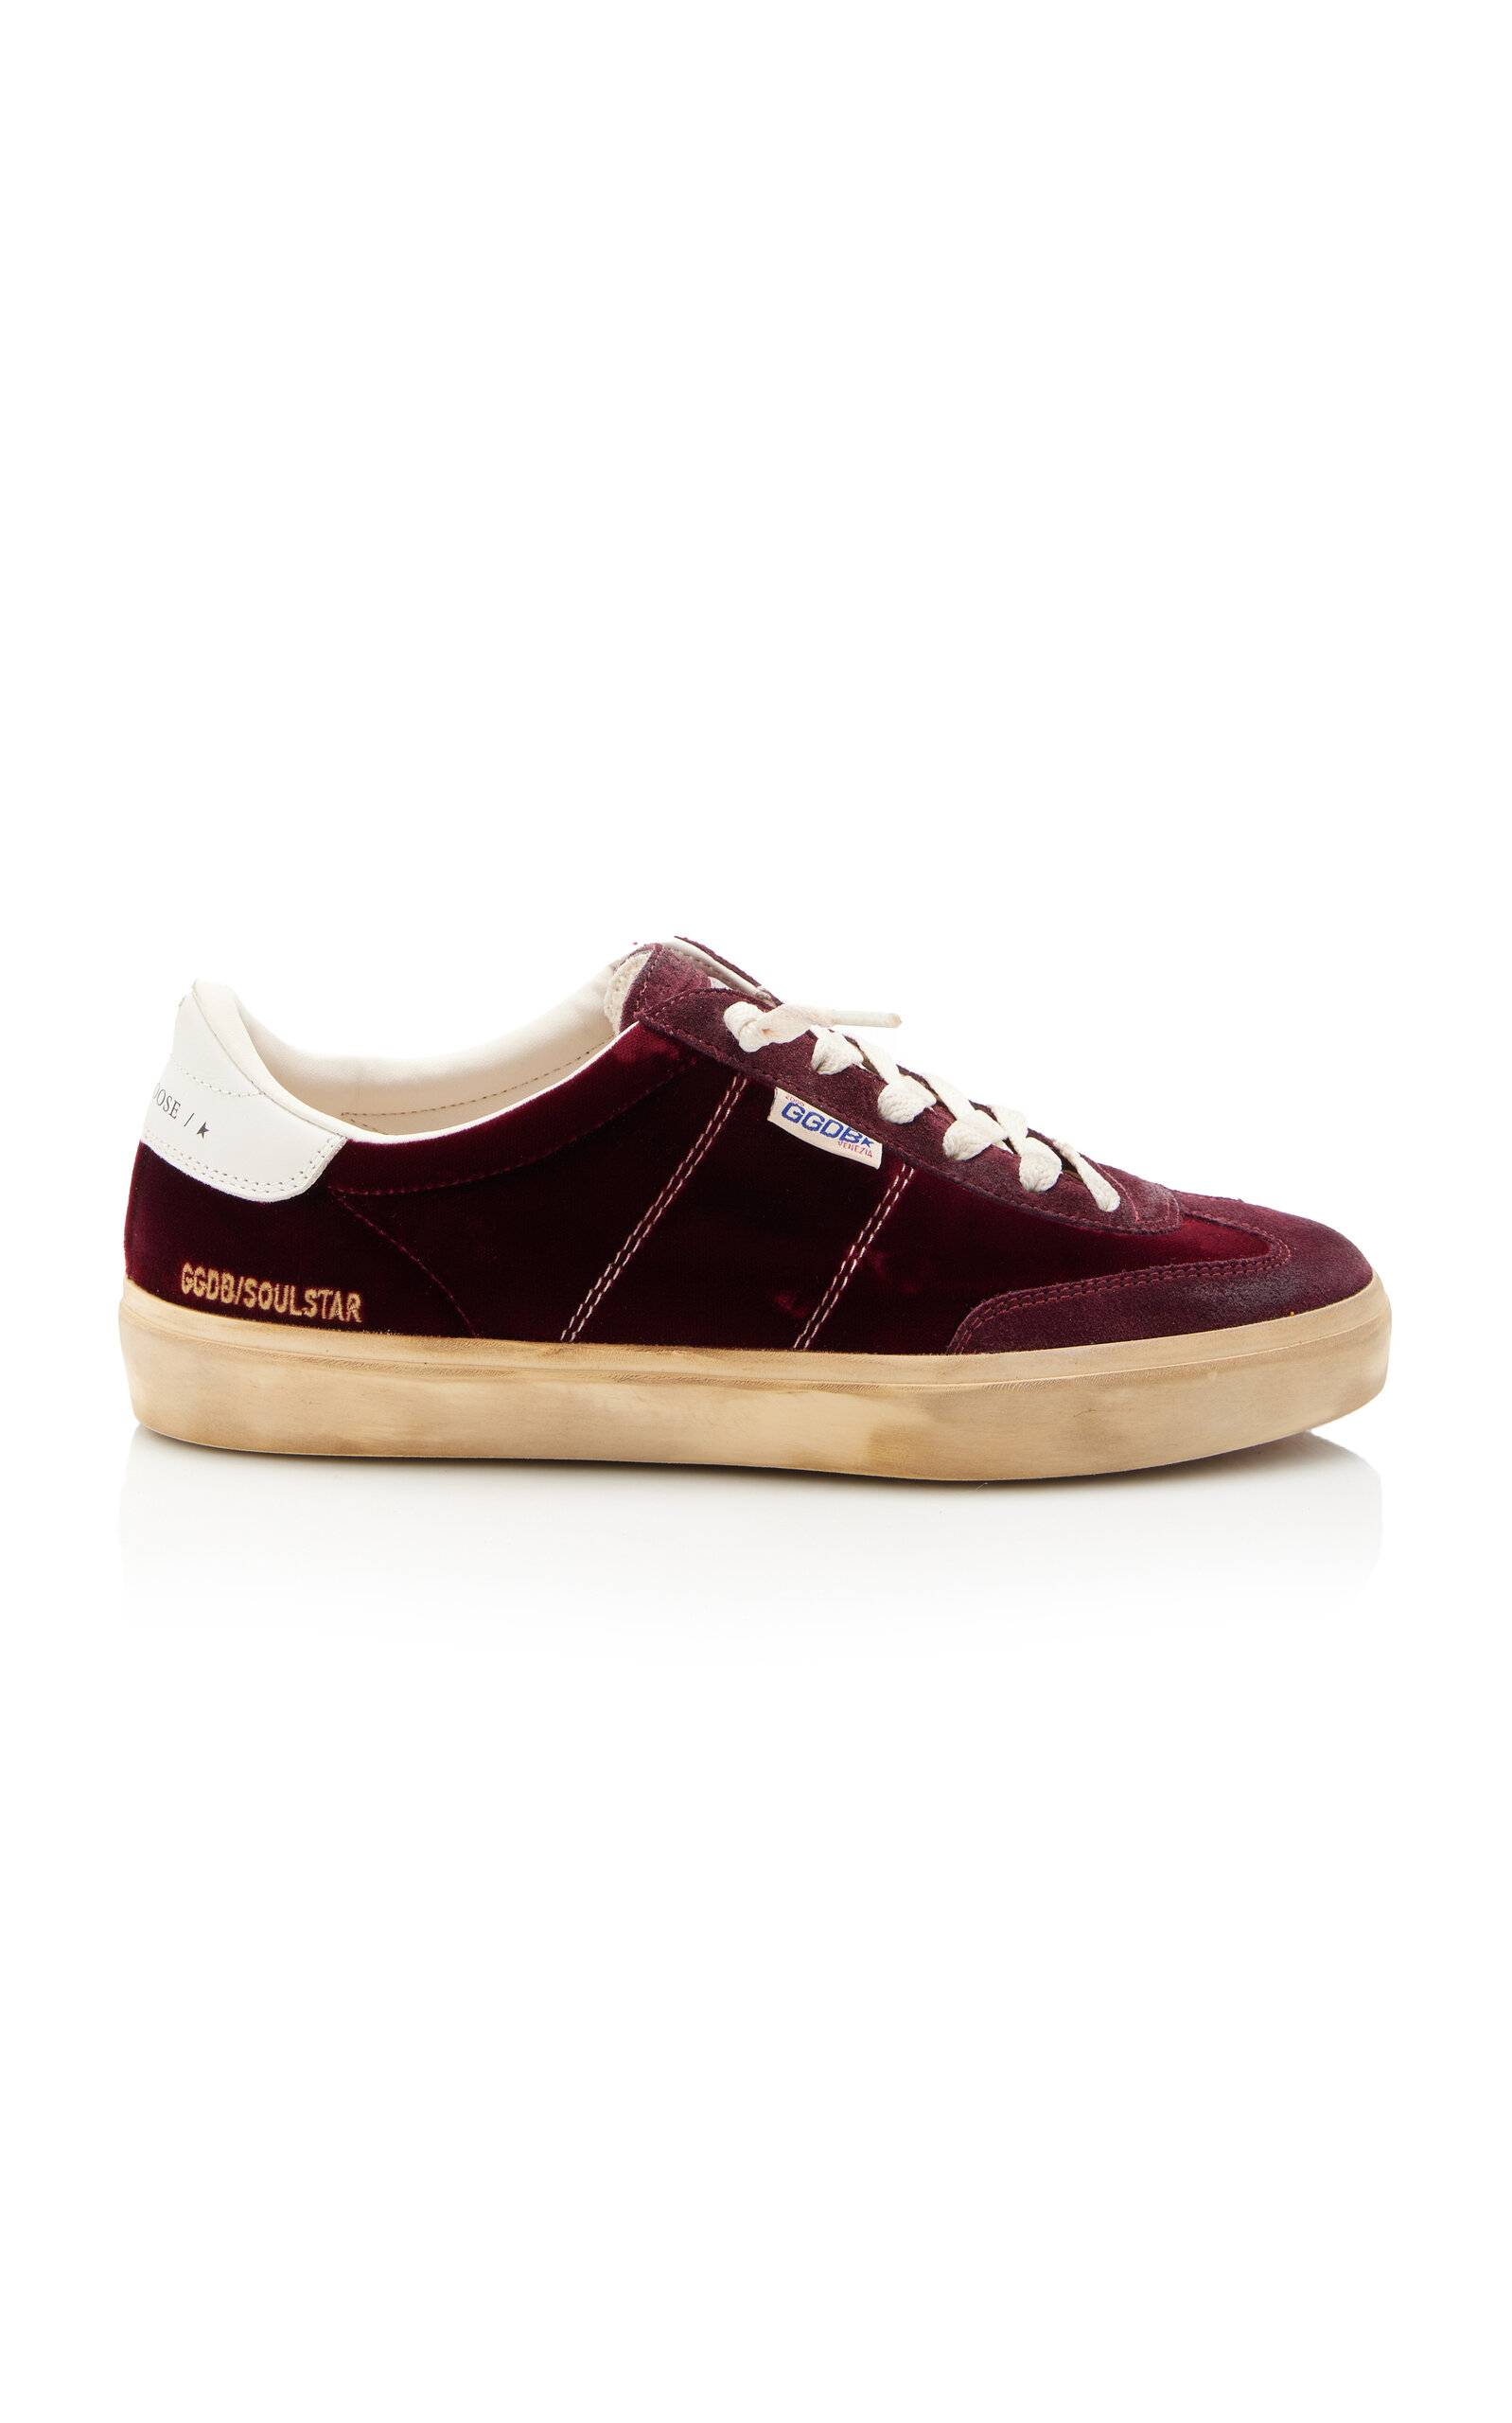 Golden Goose Soul-star Suede Trainers In Burgundy